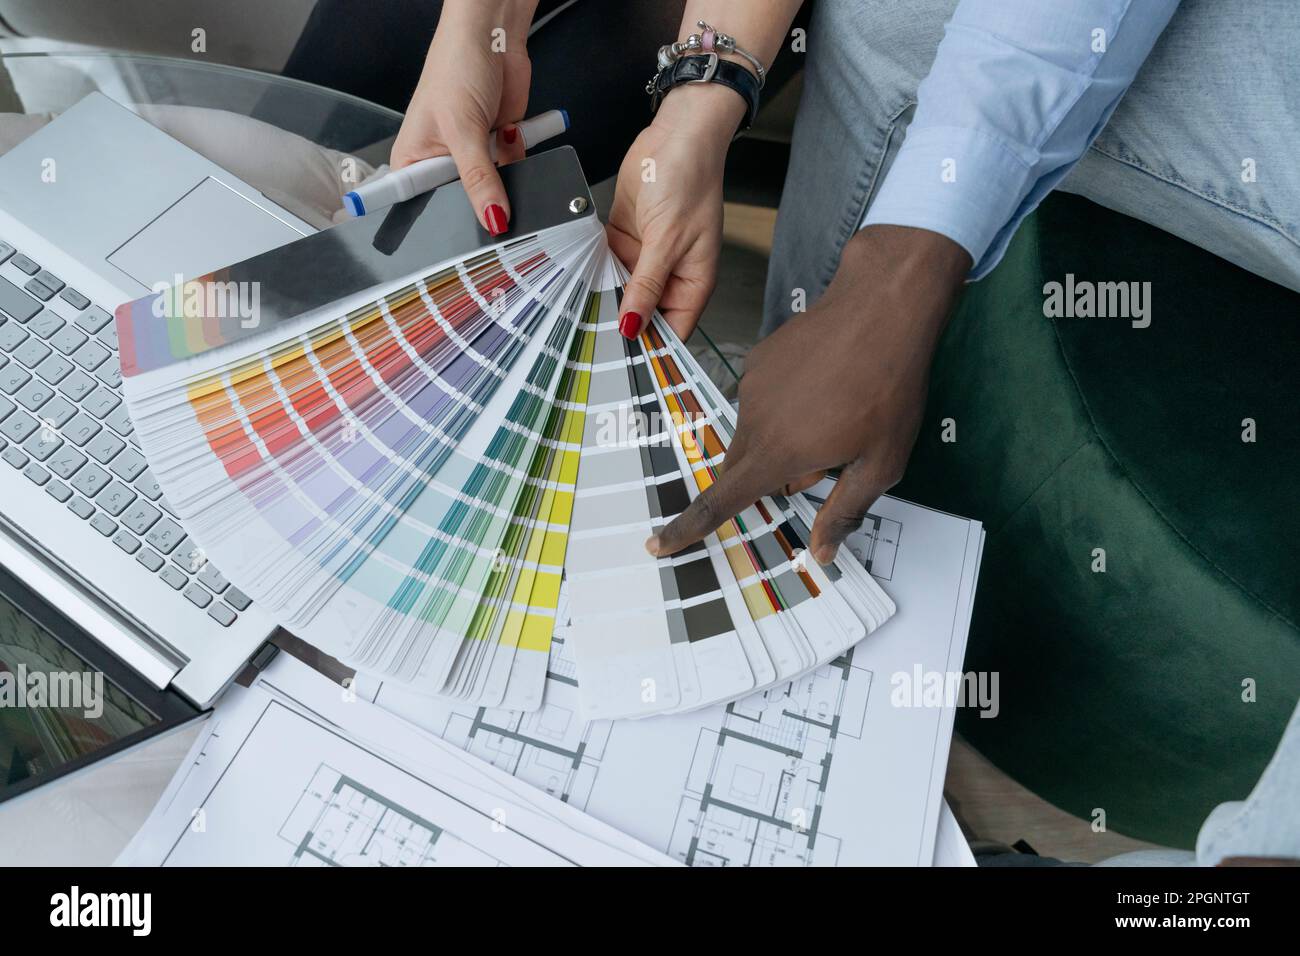 Businessman pointing on color shade by colleague at workplace Stock Photo